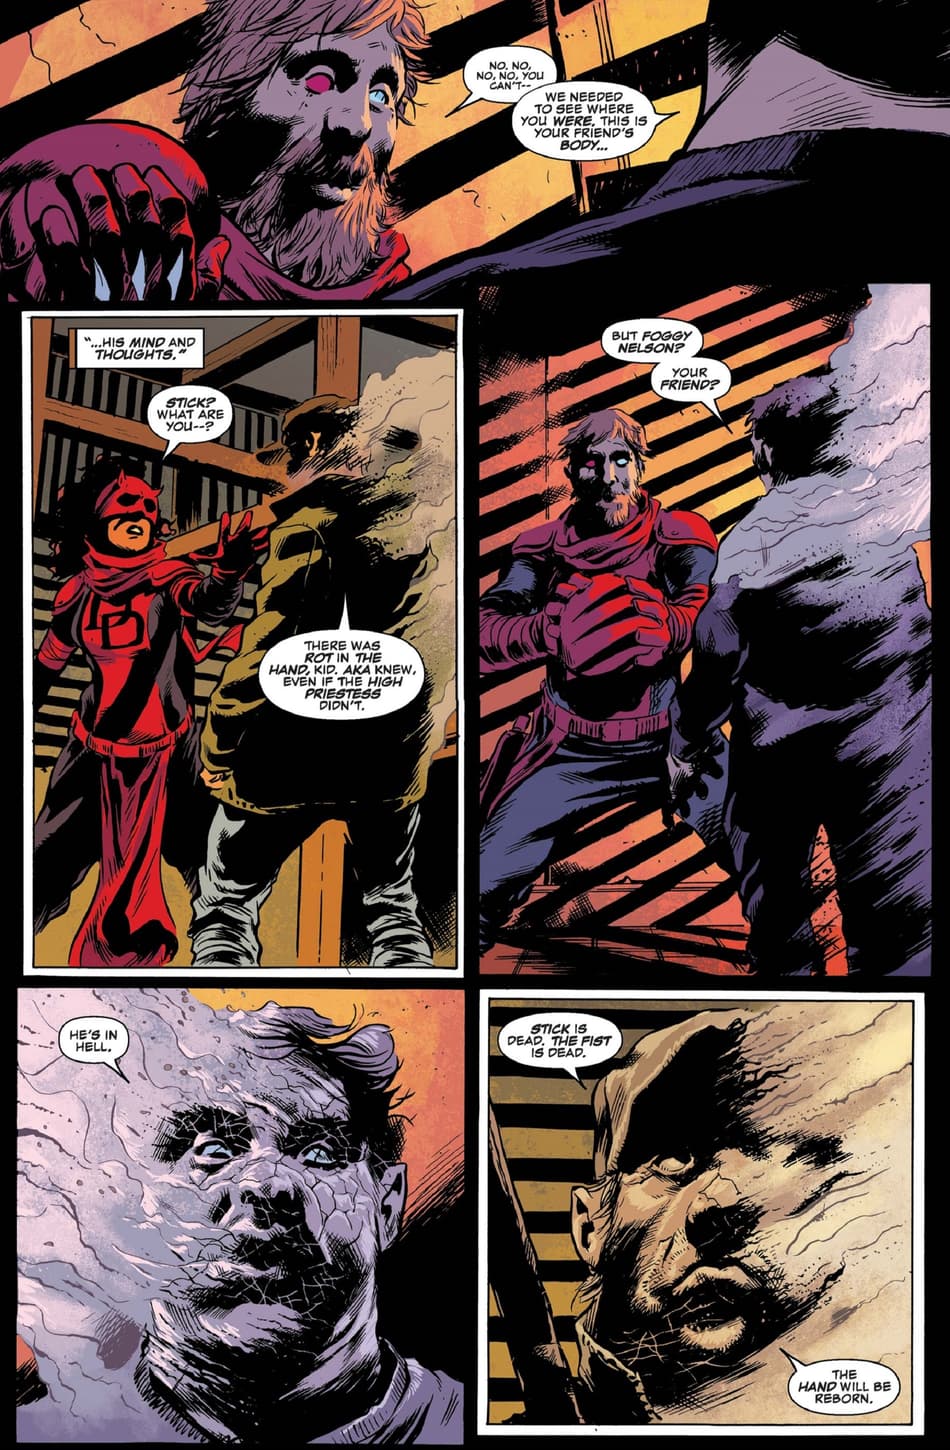 DAREDEVIL (2022) #9: Foggy Nelson and Stick are not who they seem.